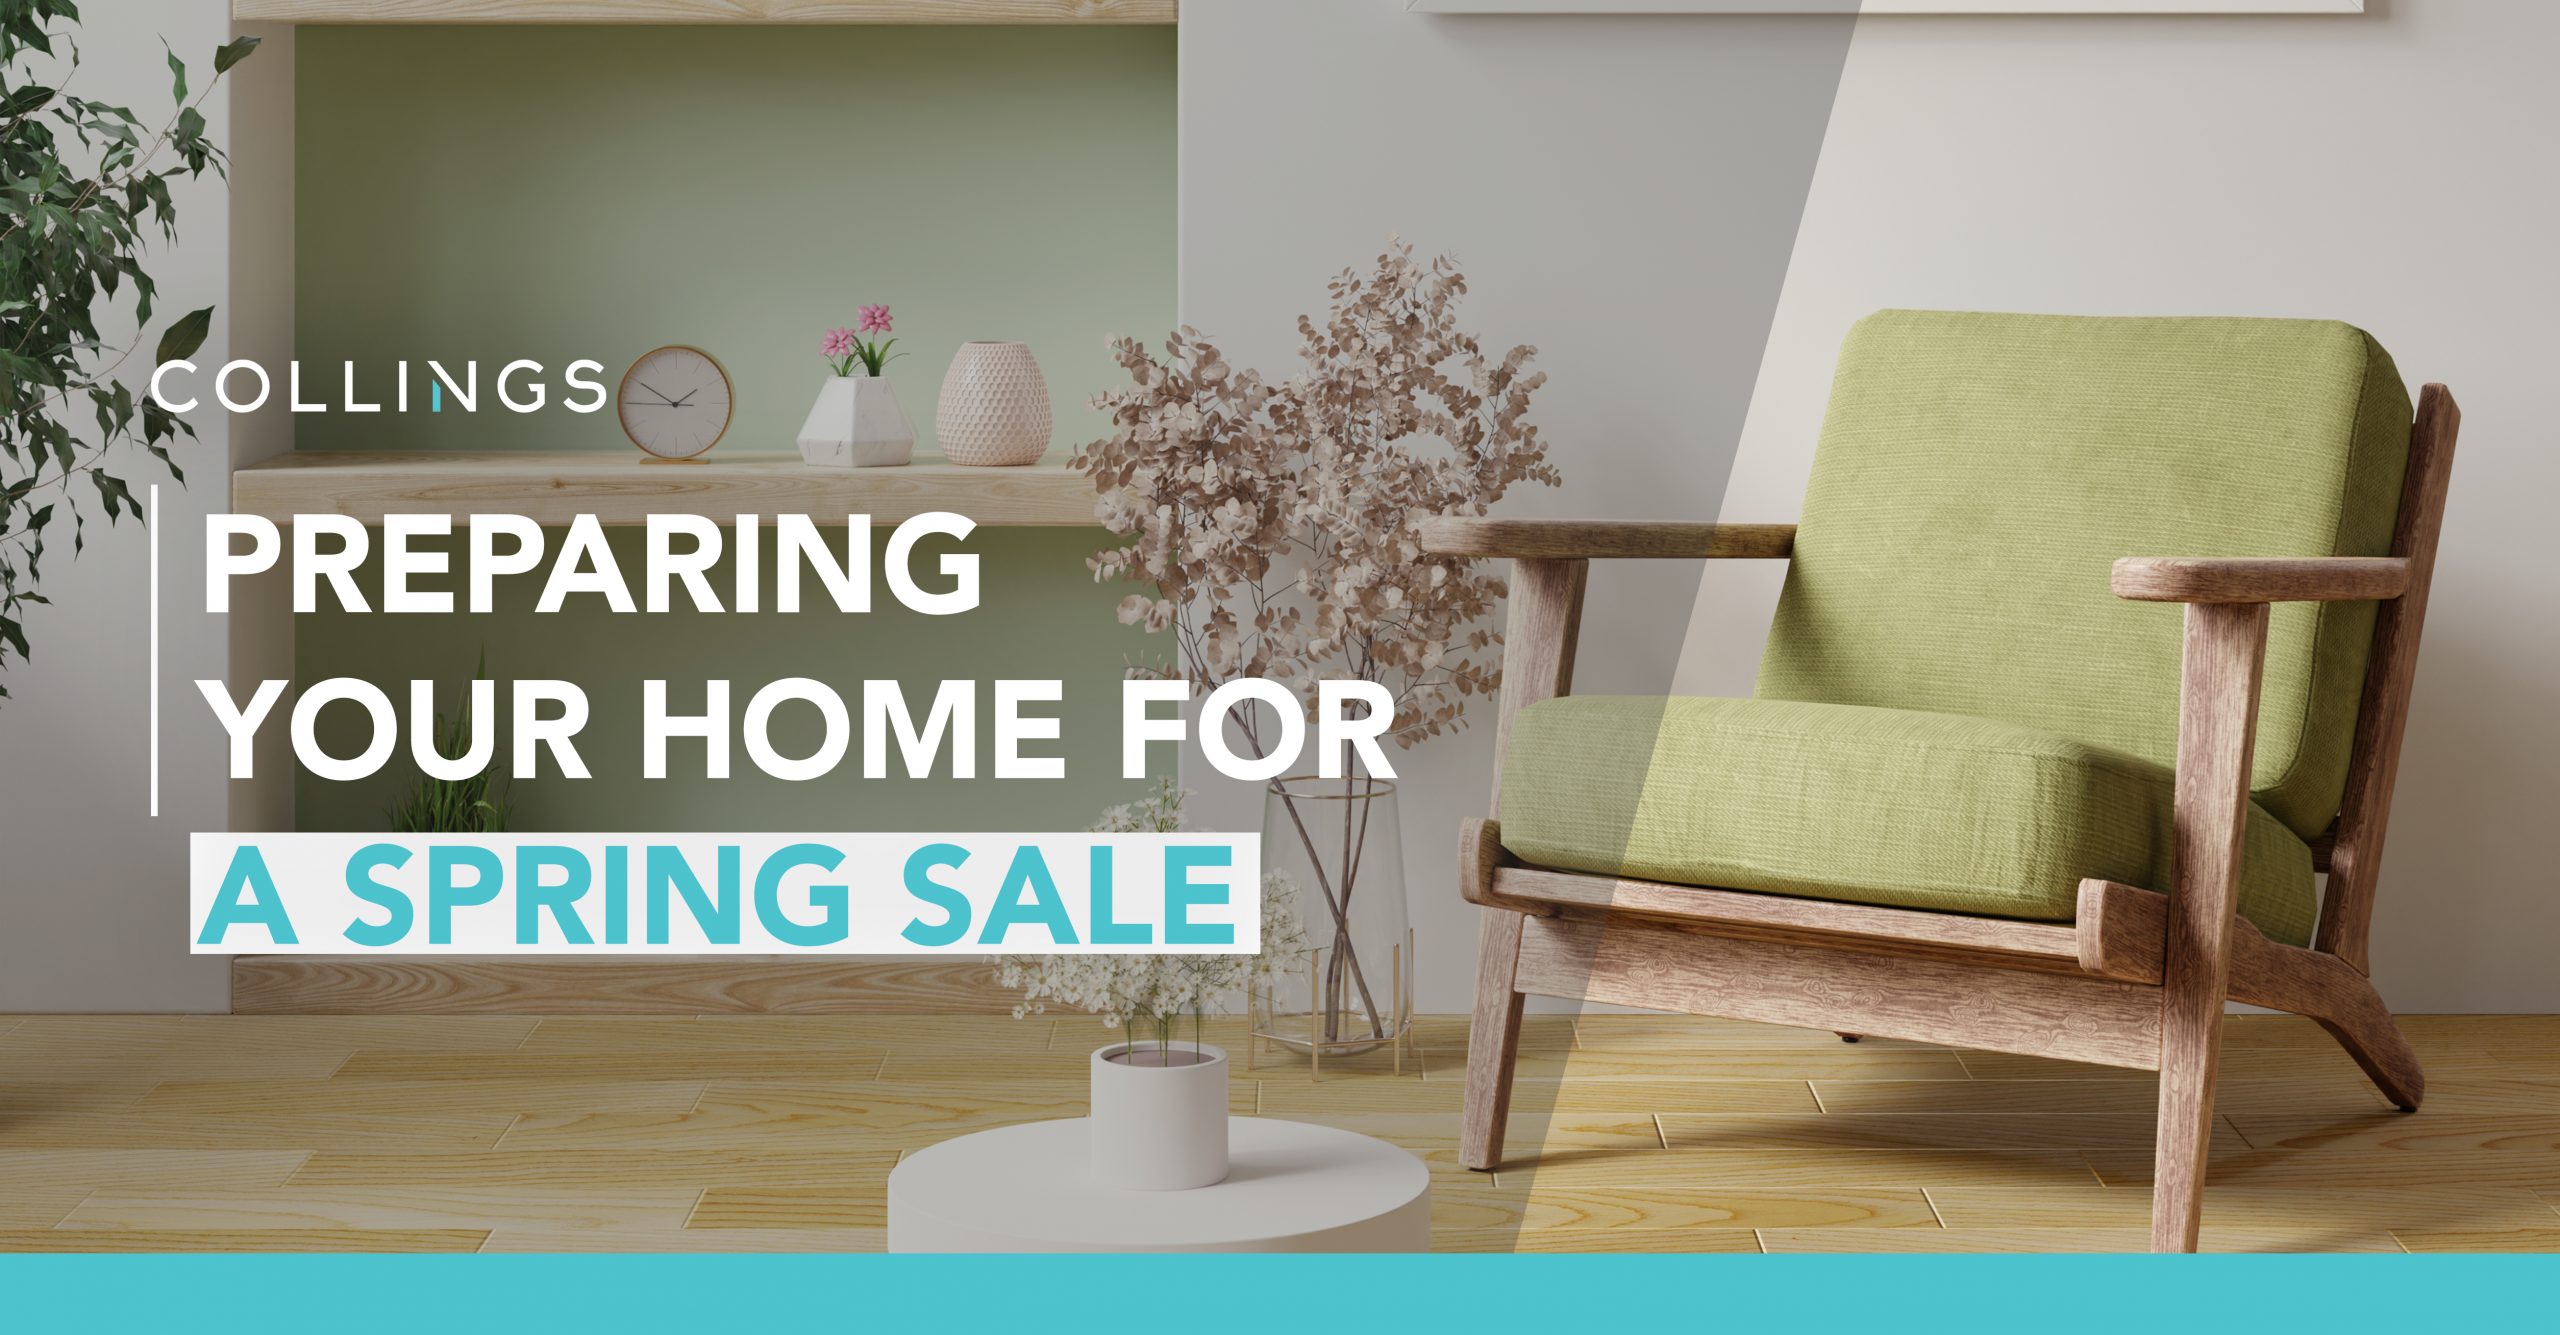 Preparing Your Home For a Spring Sale